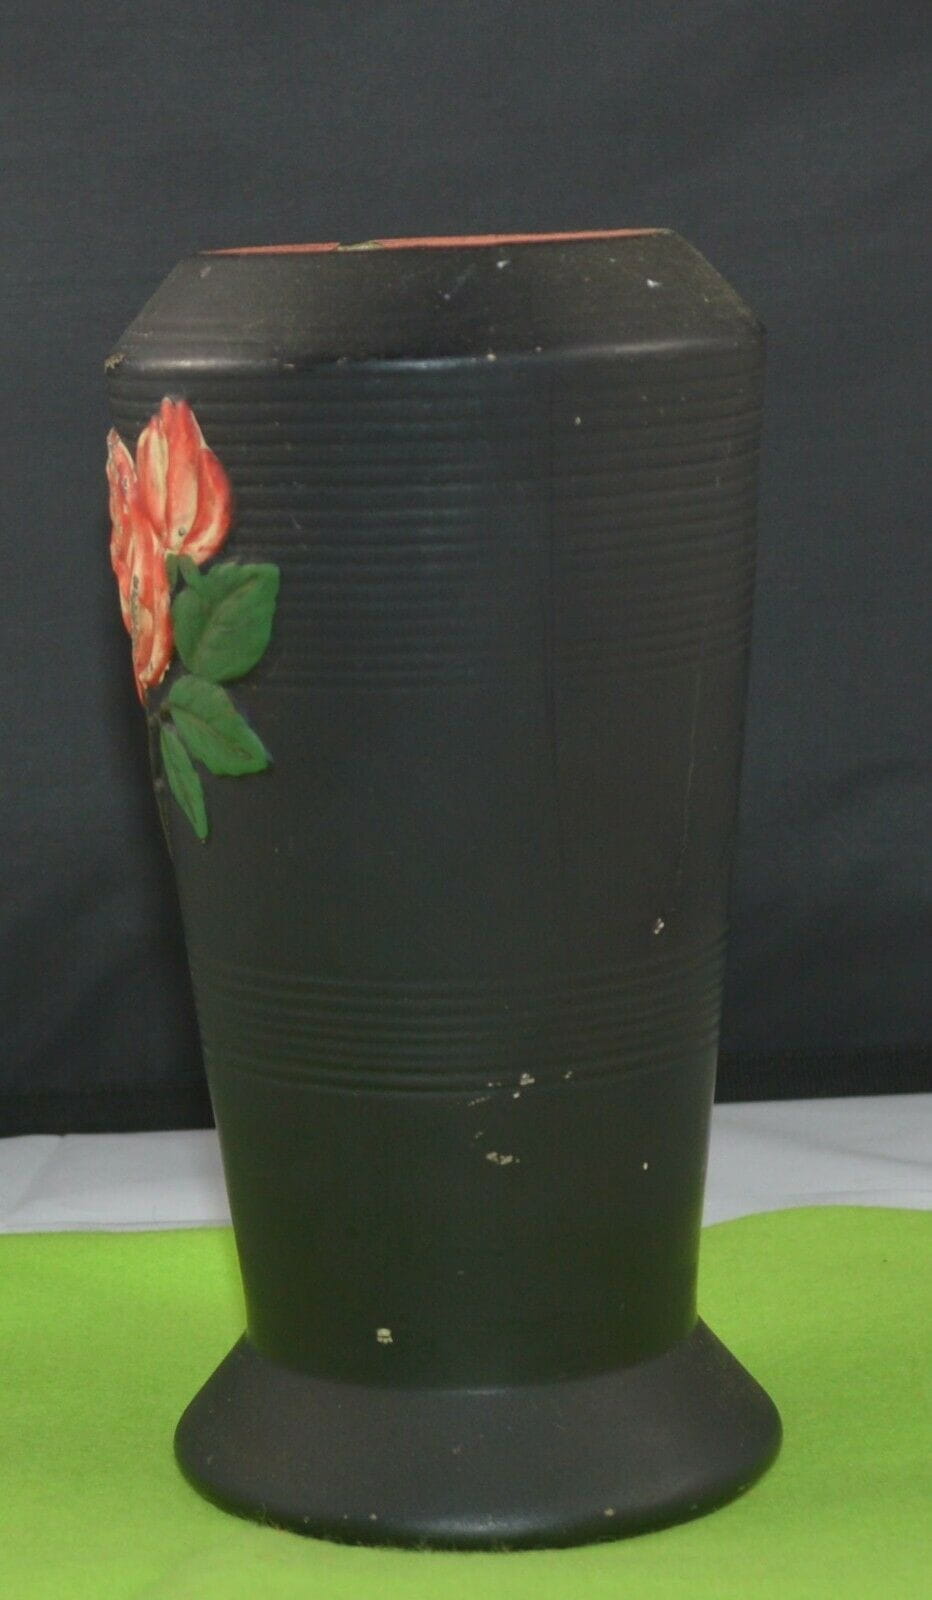 CHALKWARE? VASE BLACK VASE WITH RED ROSE(PREVIOUSLY OWNED) GOOD CONDITION - TMD167207